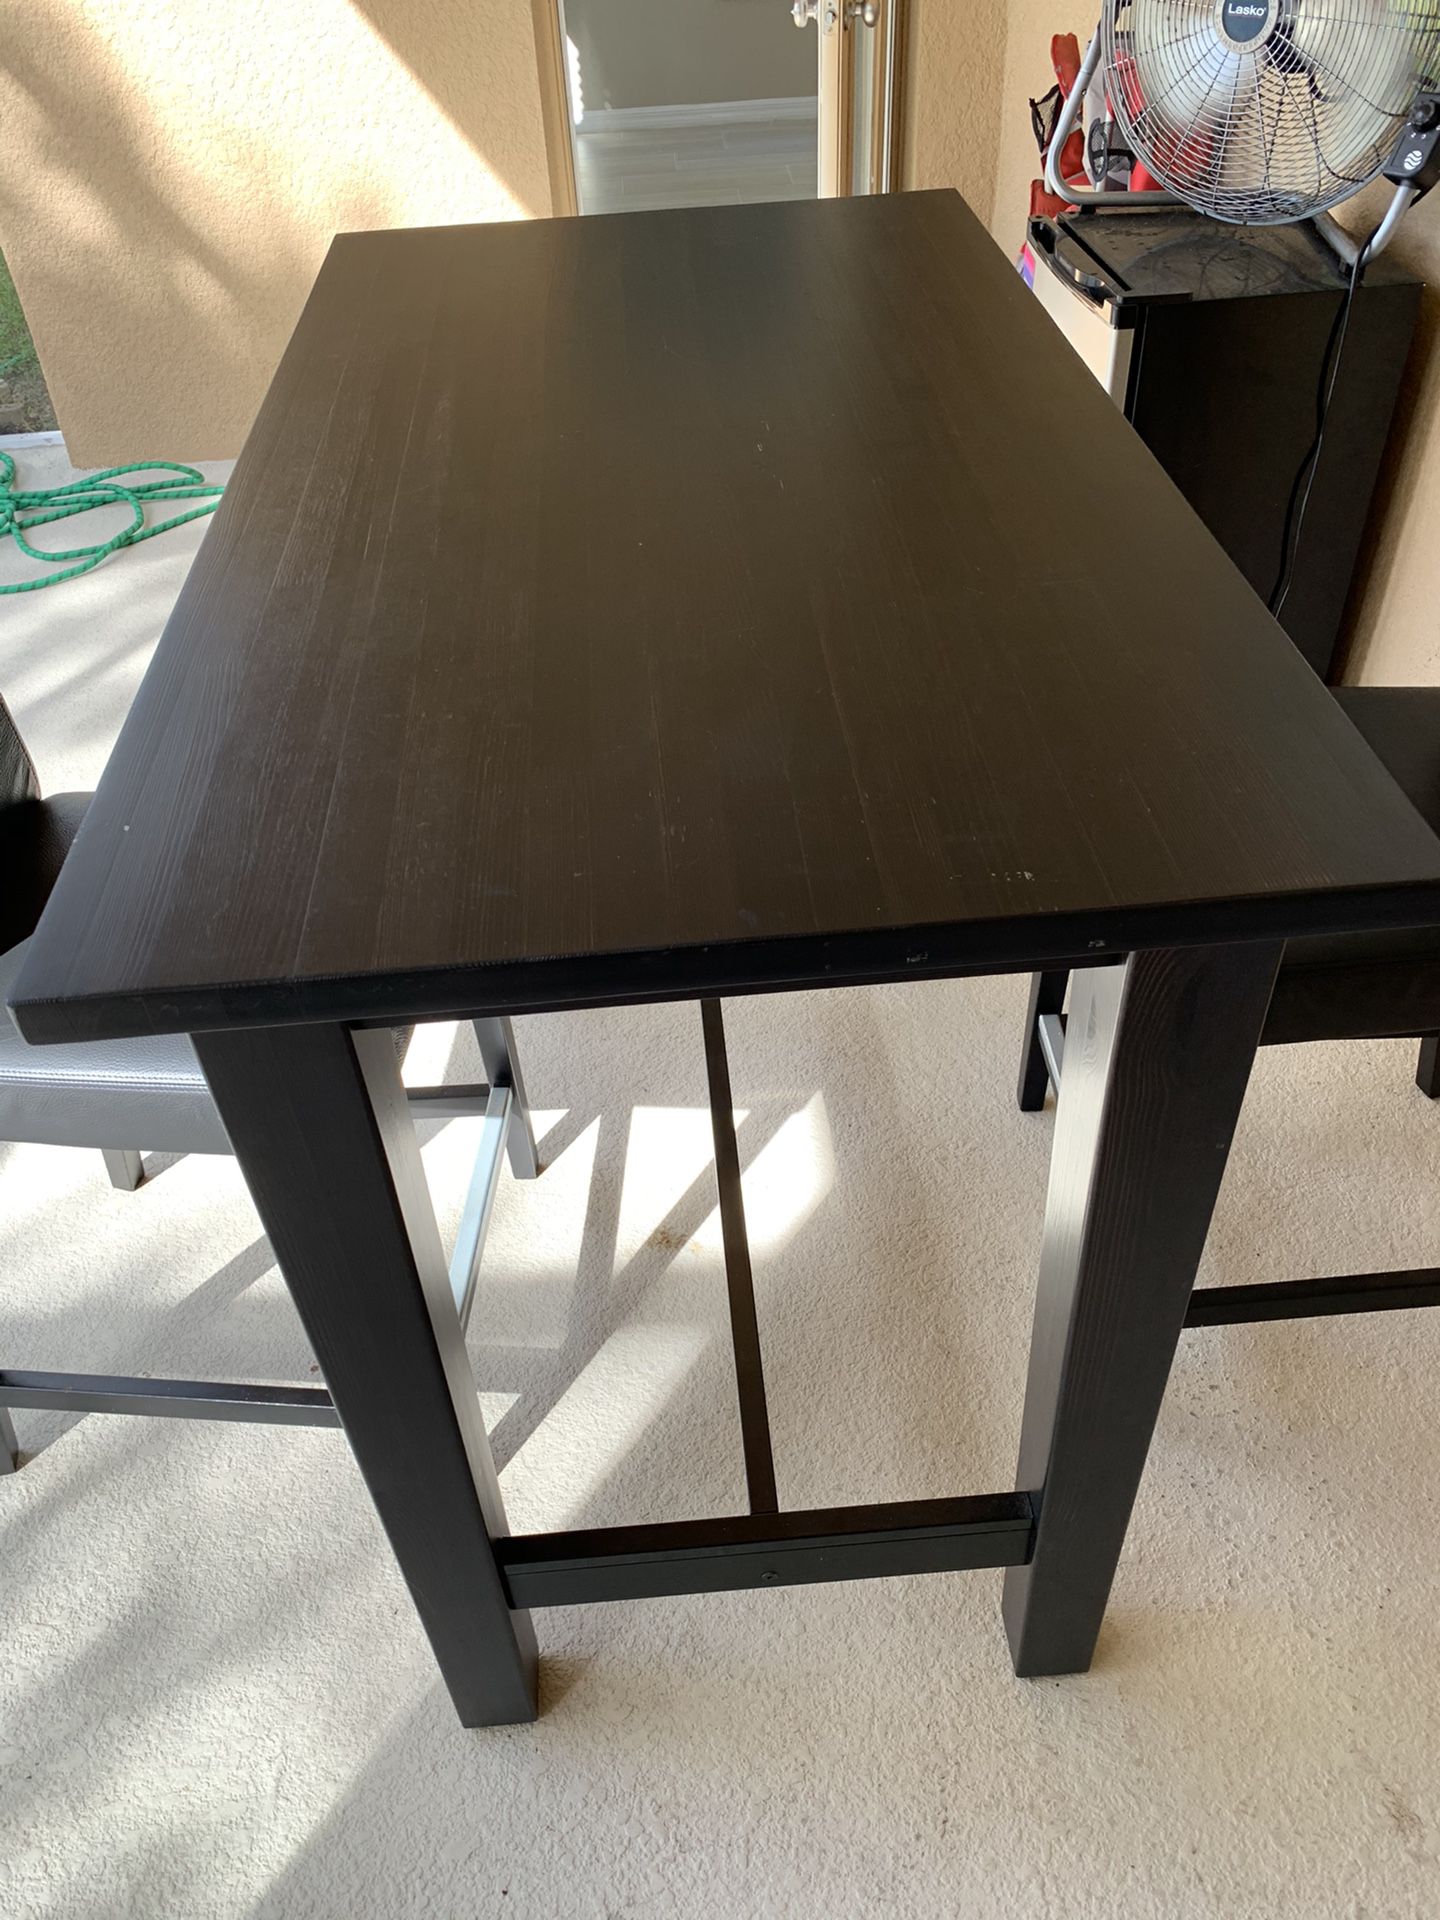 Tall dark table with 2 bar stool chairs. 4ft x 28in x 42in